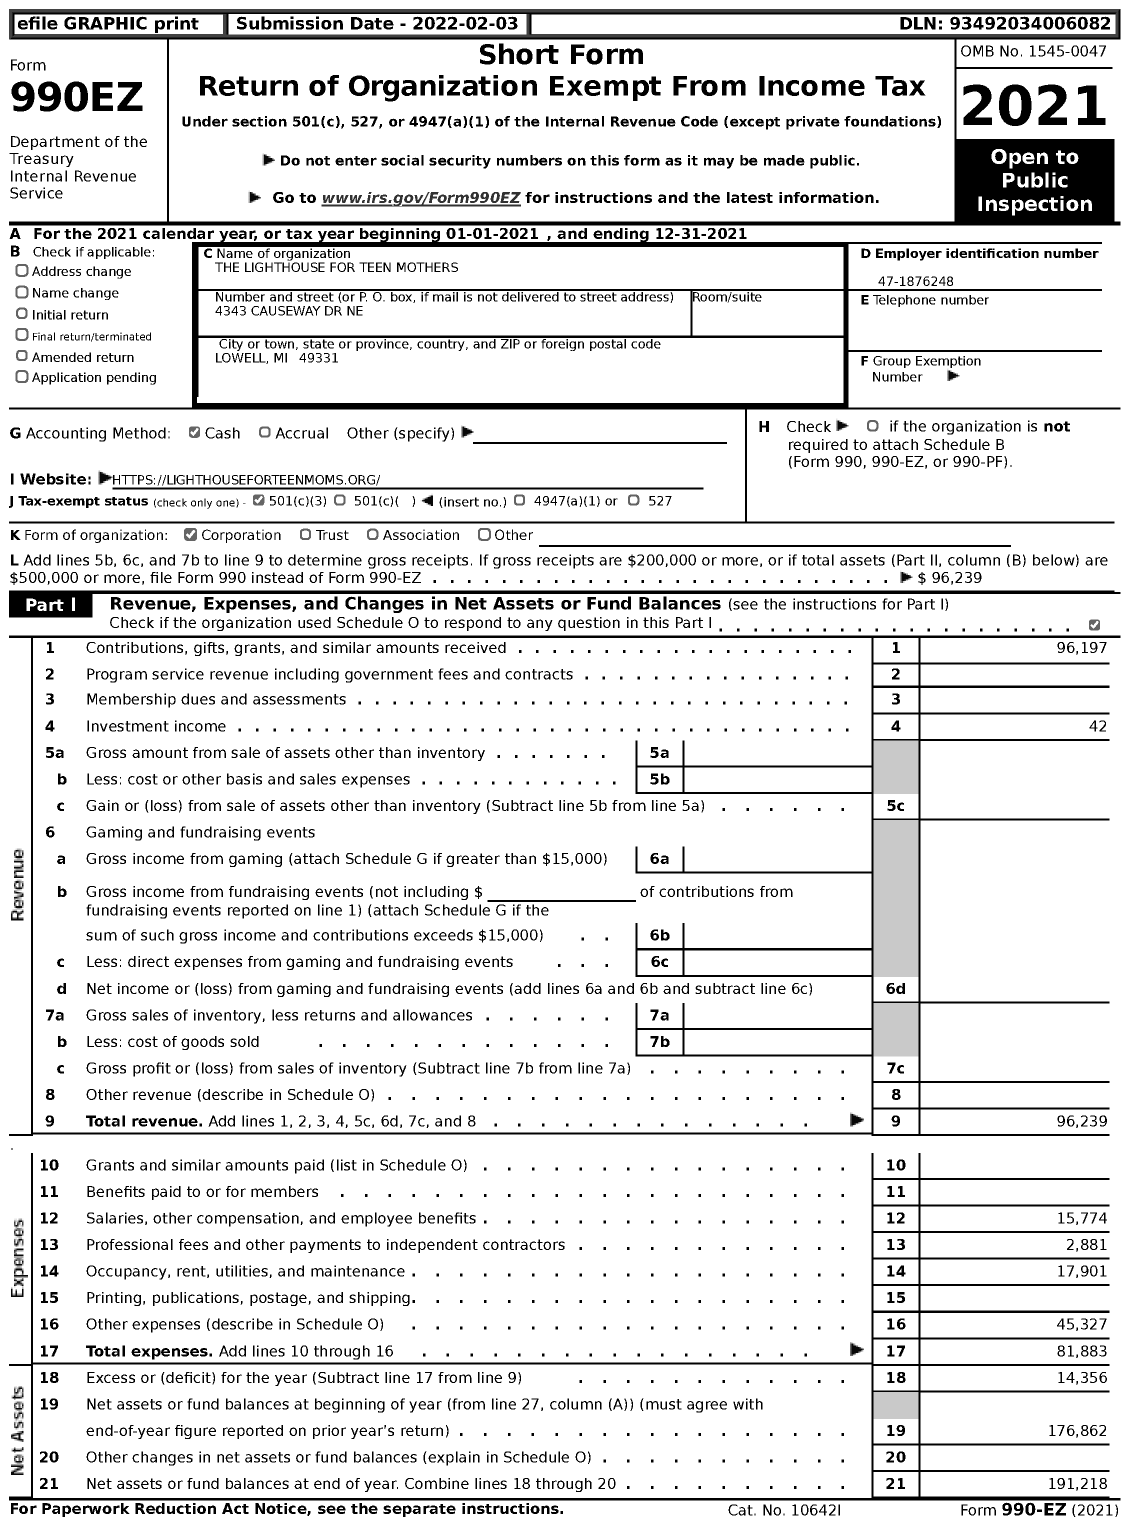 Image of first page of 2021 Form 990EZ for The Lighthouse for Teen Mothers